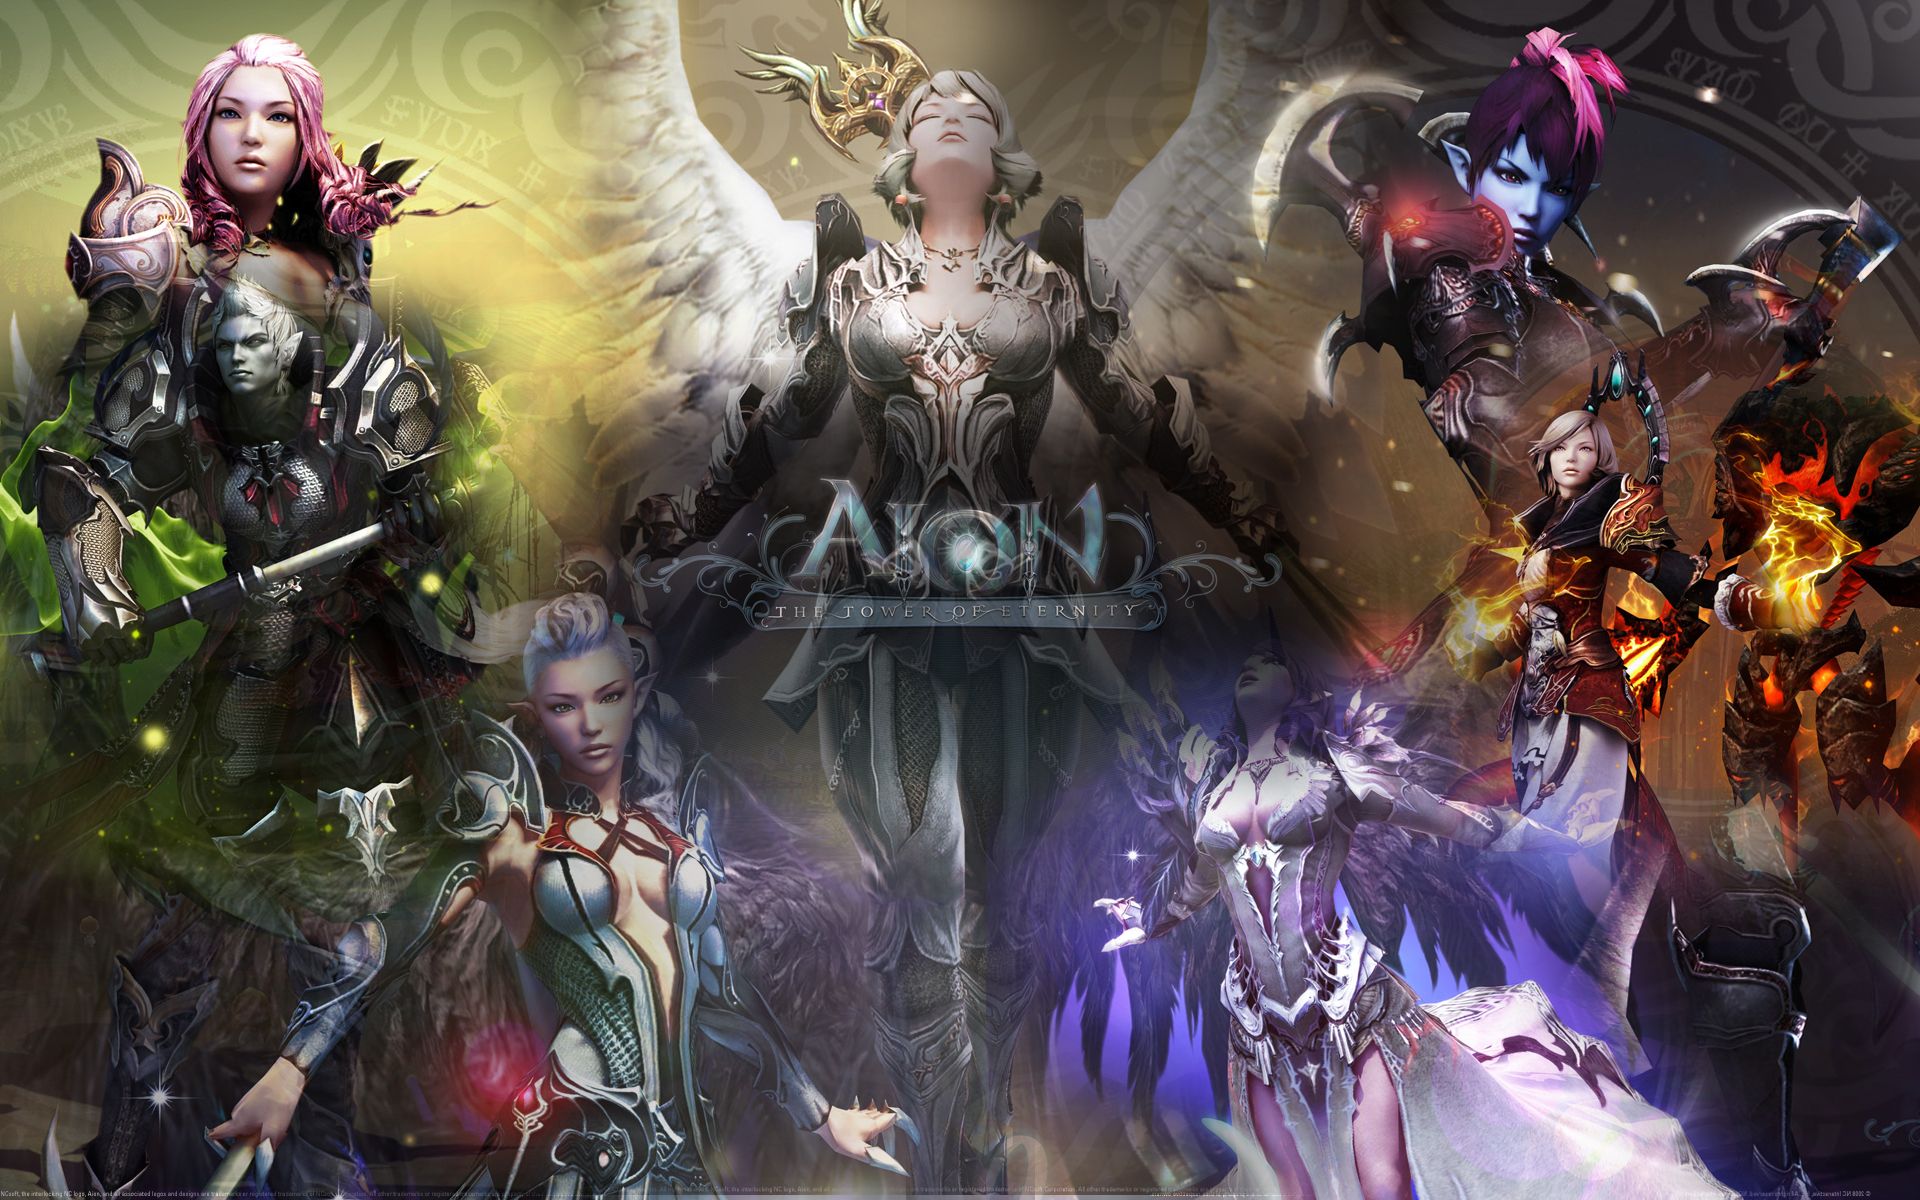 Wallpaper Aion Online Full HD Game Characters Artworks